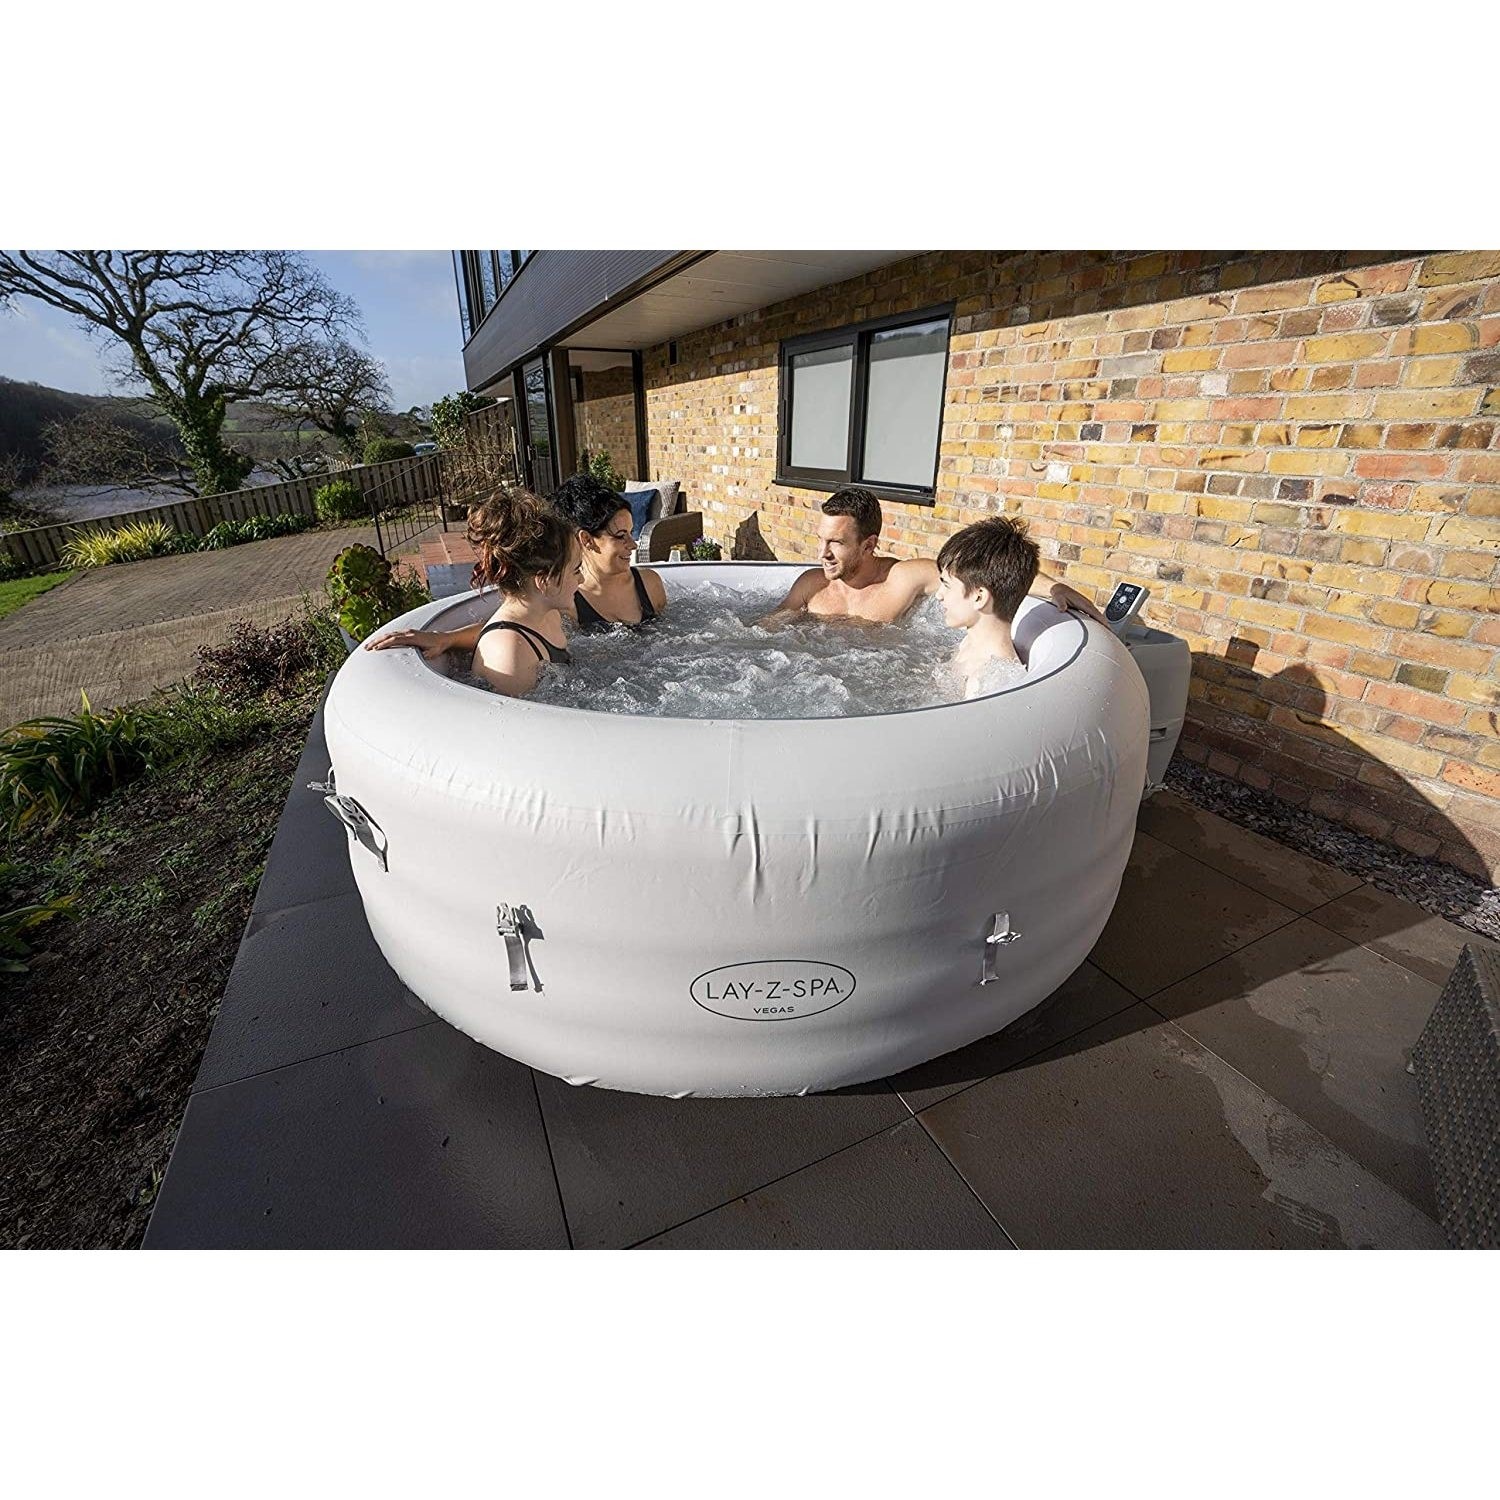 Lay-Z-Spa AirJet Vegas 6 Person Hot Tub in White - Box Opened A1/60011 ...